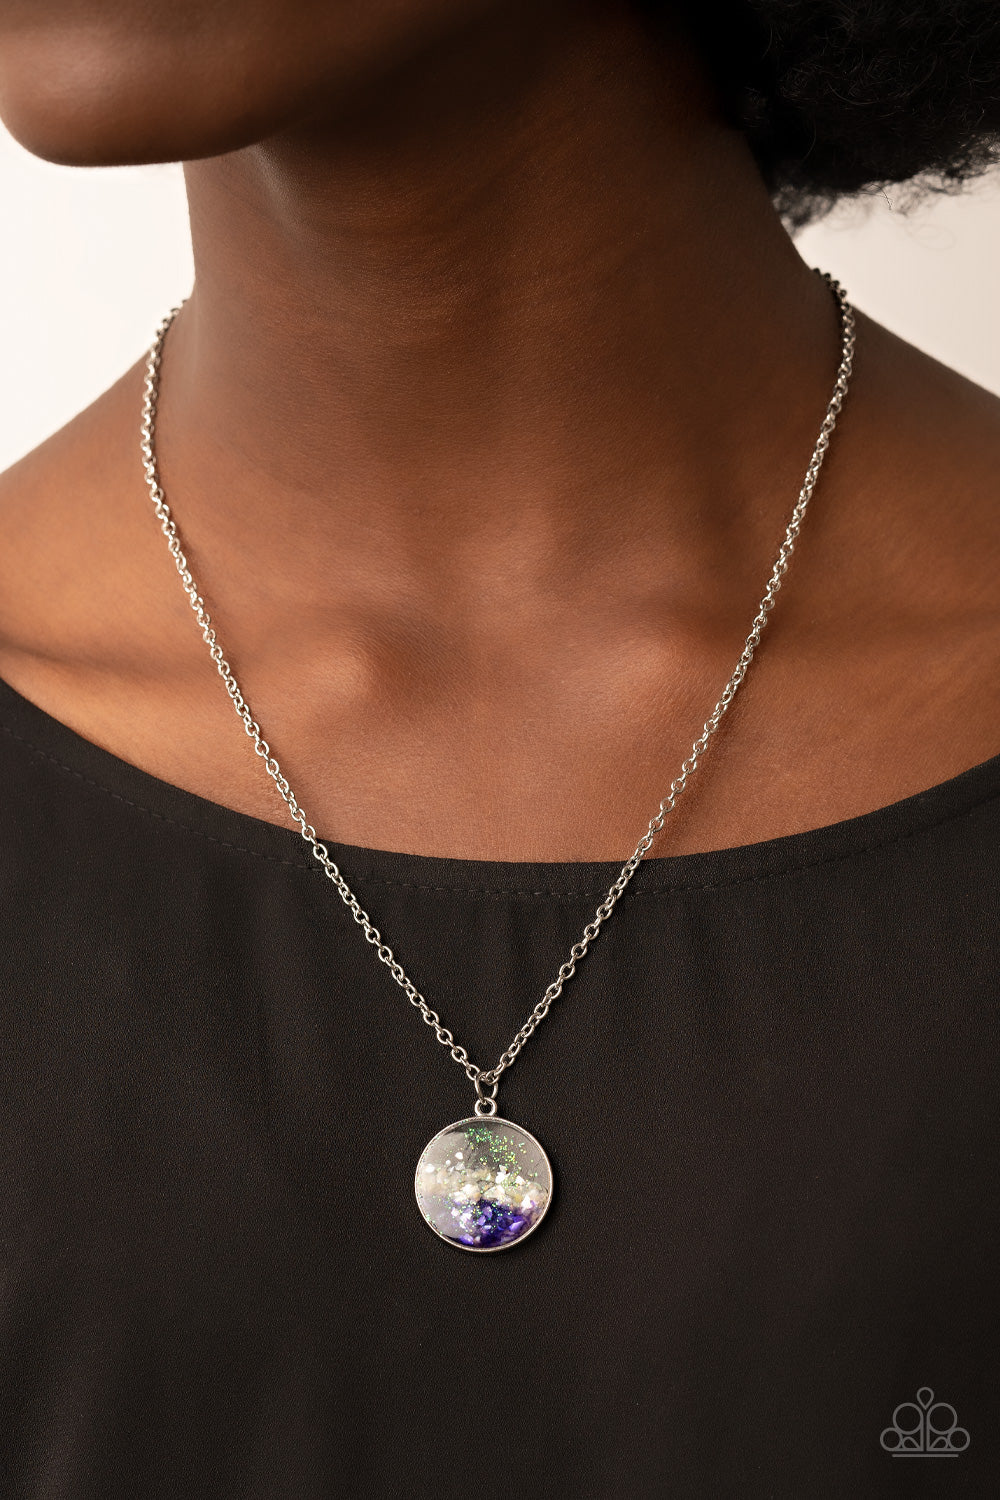 Completely Crushed - purple - Paparazzi necklace